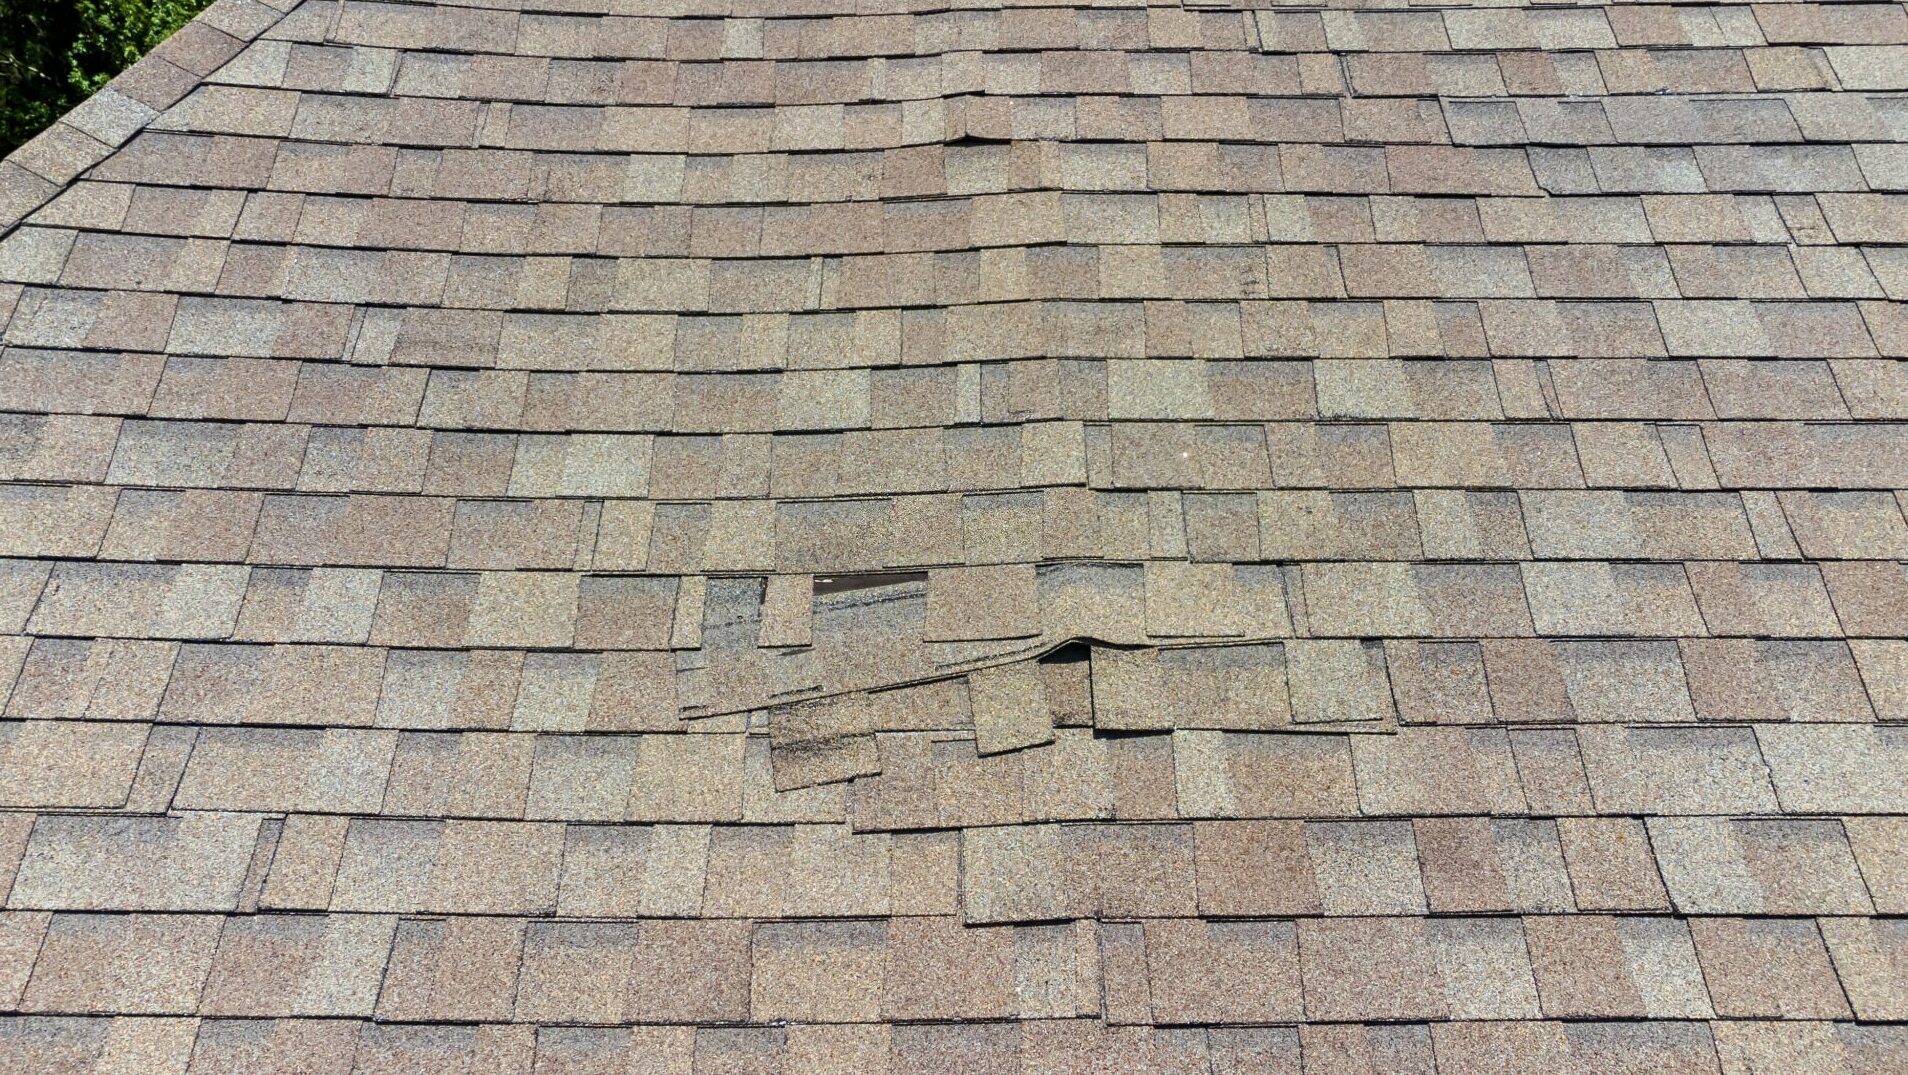 Hail Damage Claim For Your Roof